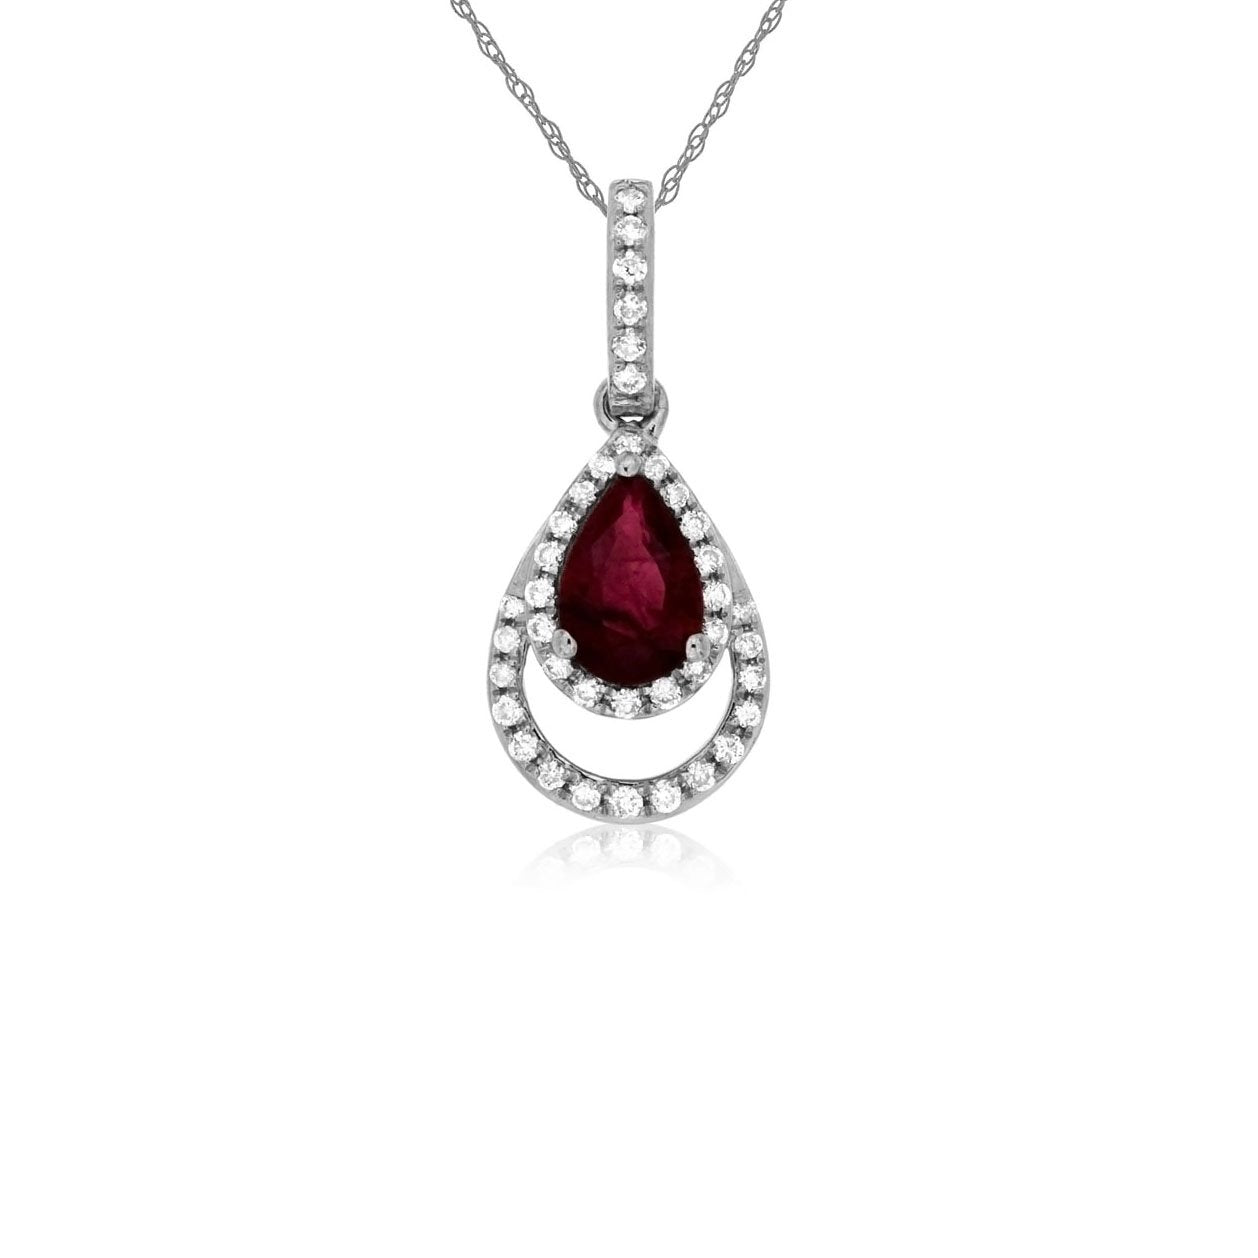 Sabel Collection 14K White Gold Pear Shape Ruby with Diamond Pendant